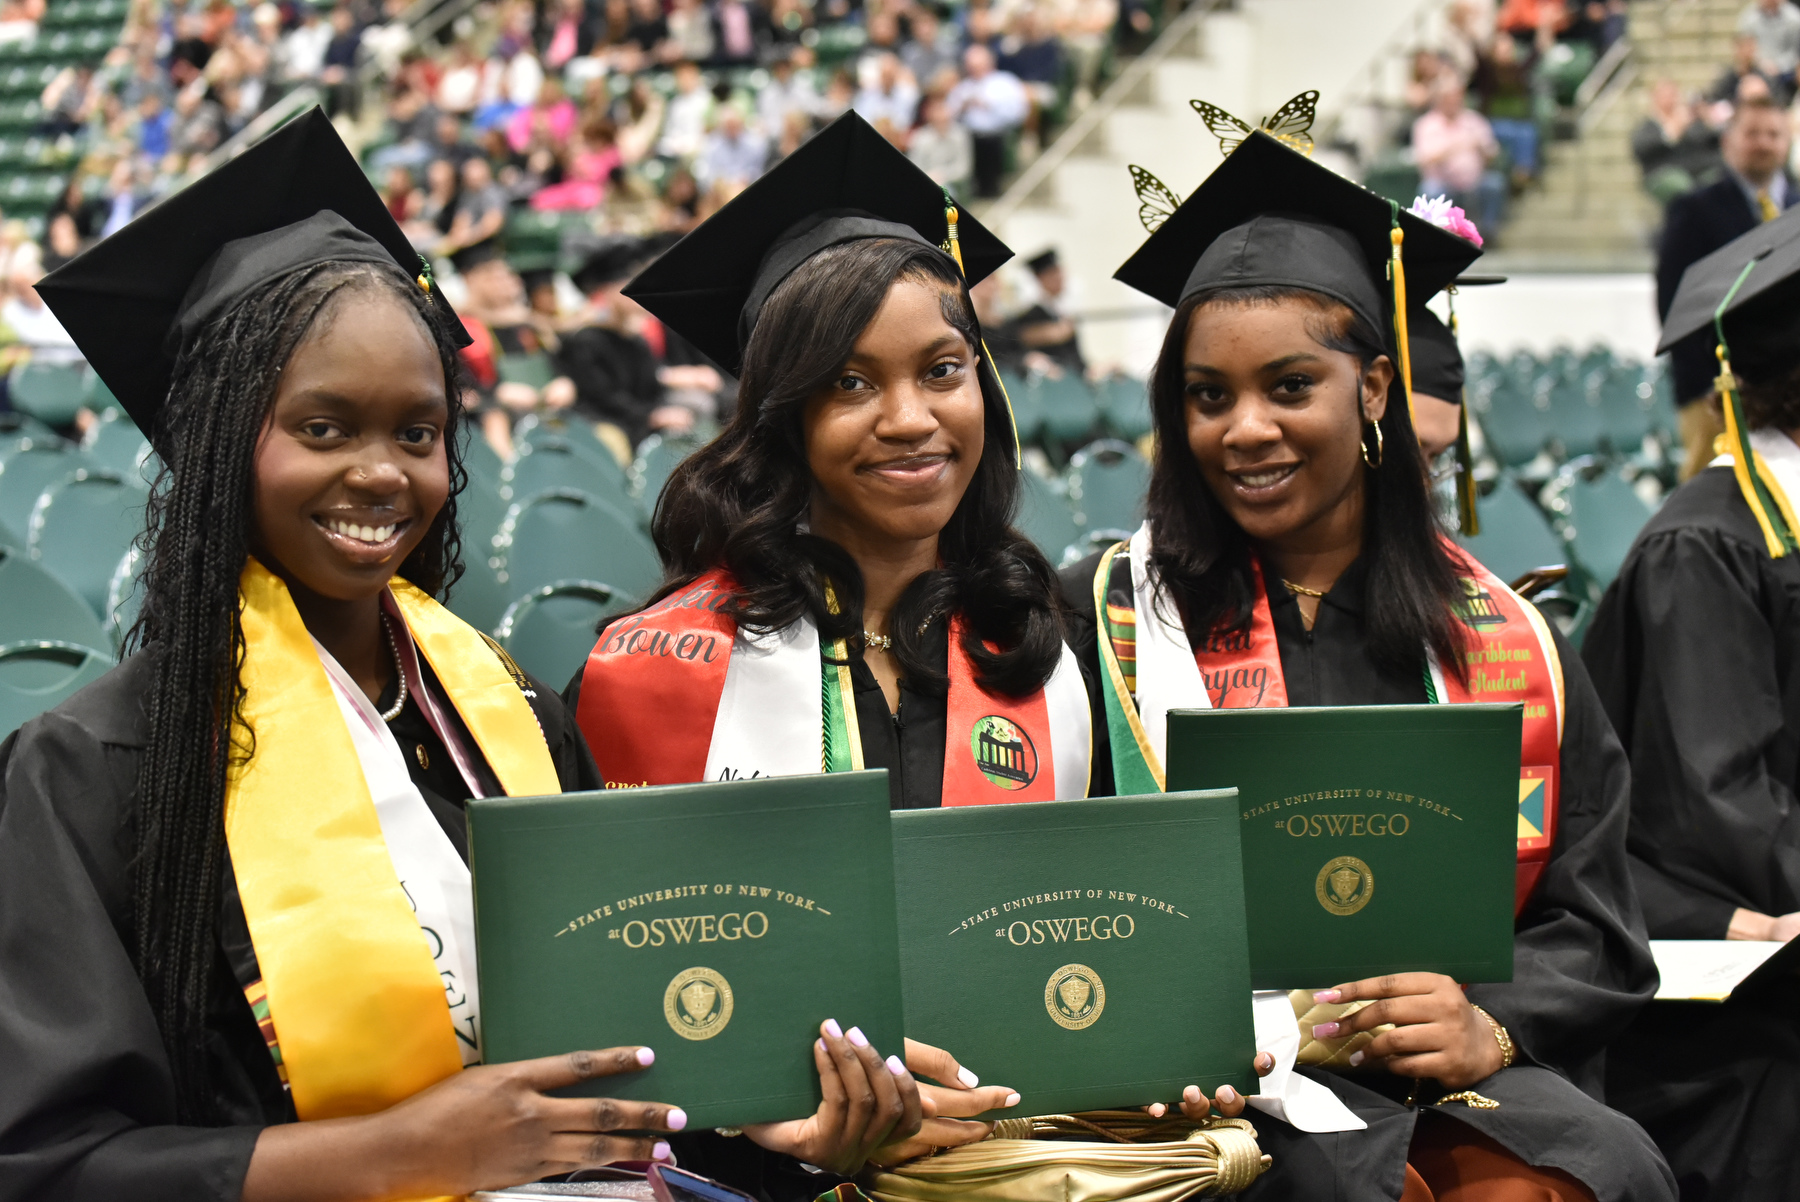 School of Business graduates show deserved pride in their accomplishments.